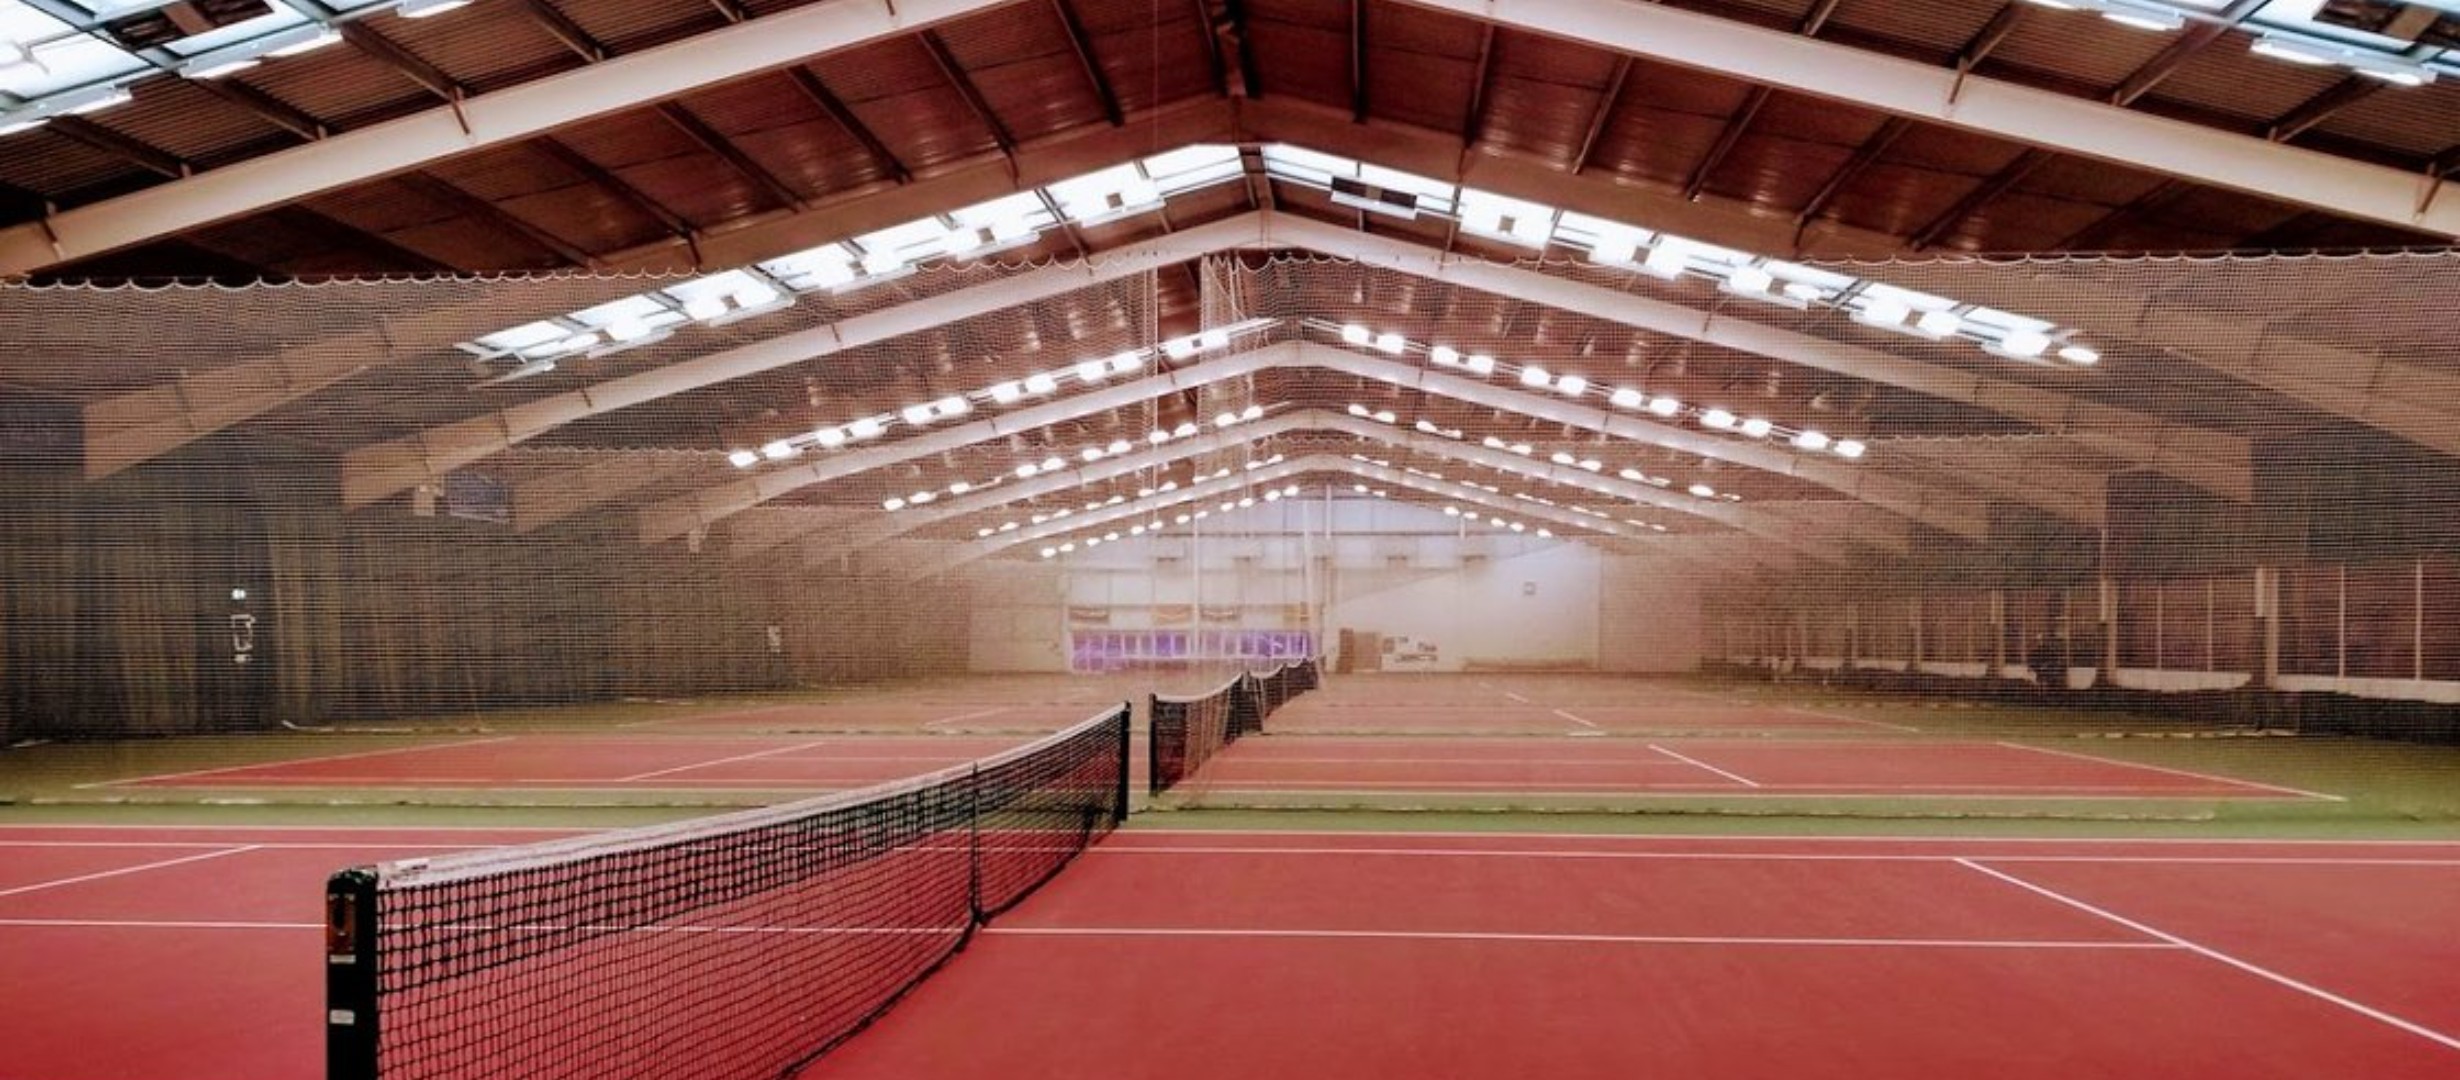 All 6 red and green indoor tennis courts with curtains drawn